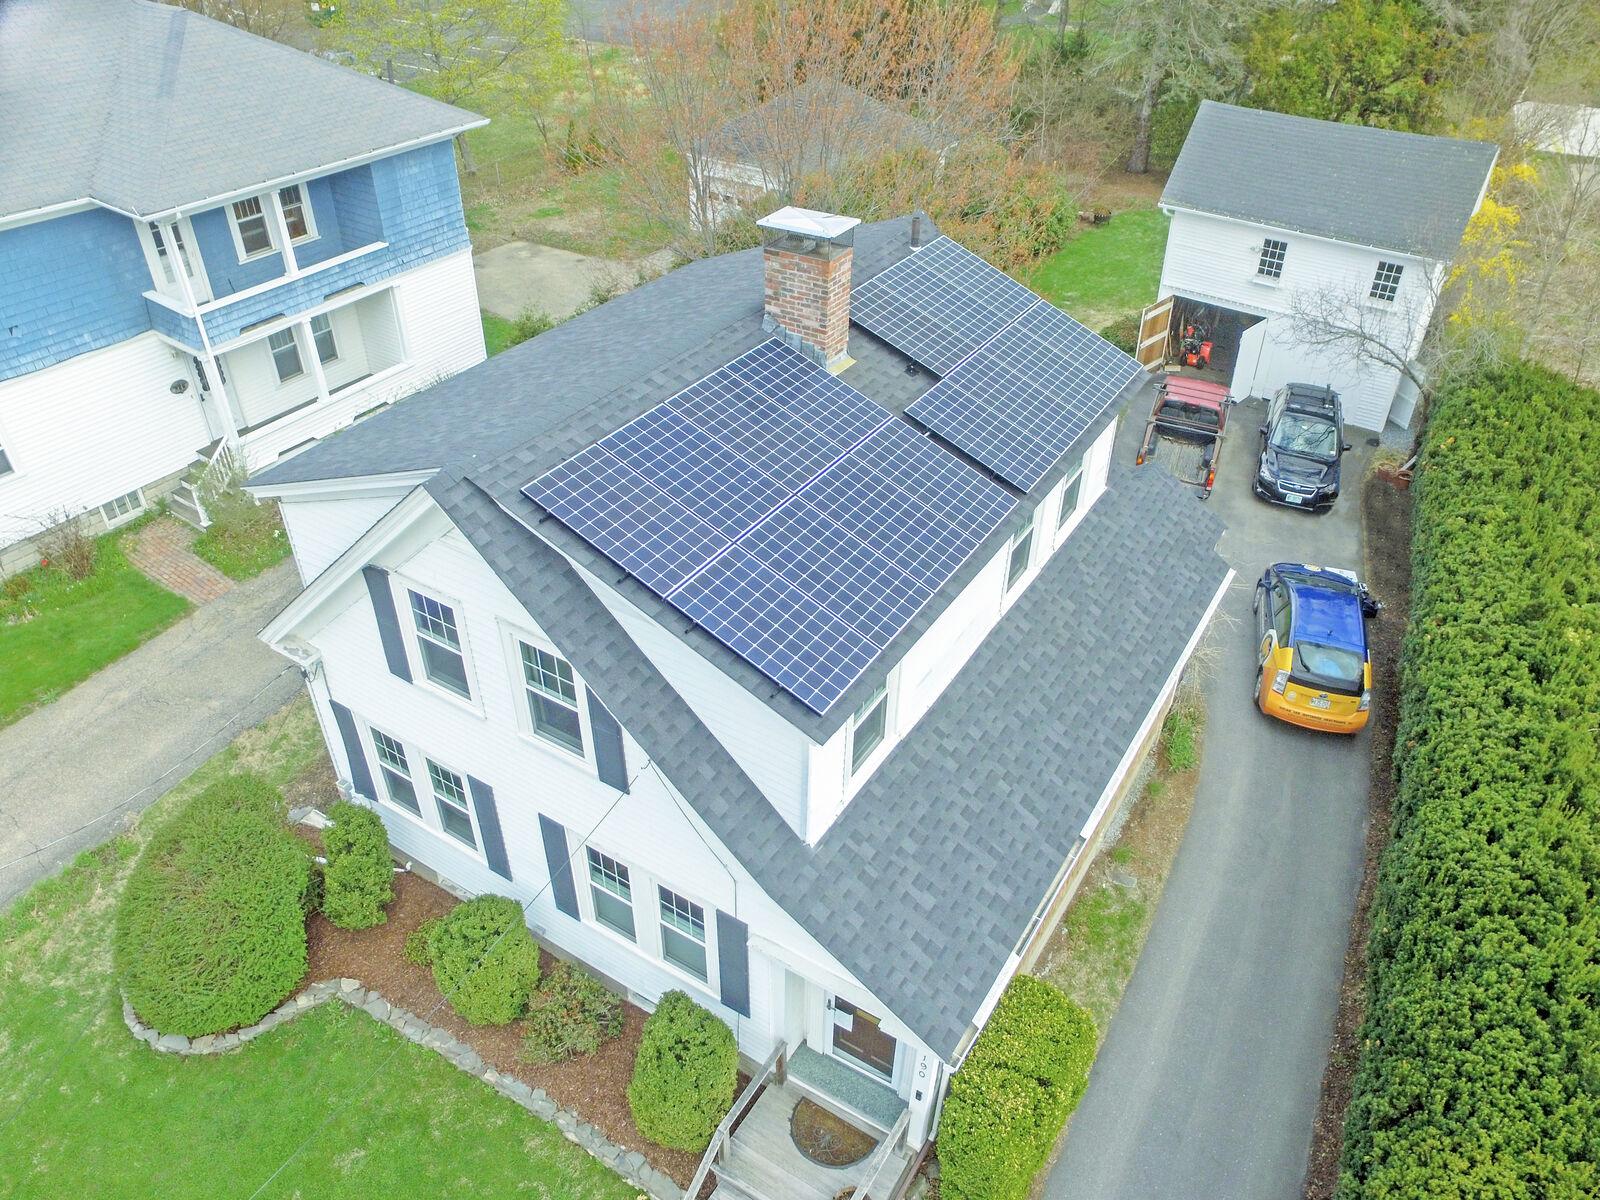 Barrett Miles Uses Solar Loan to Power his Energy Independence